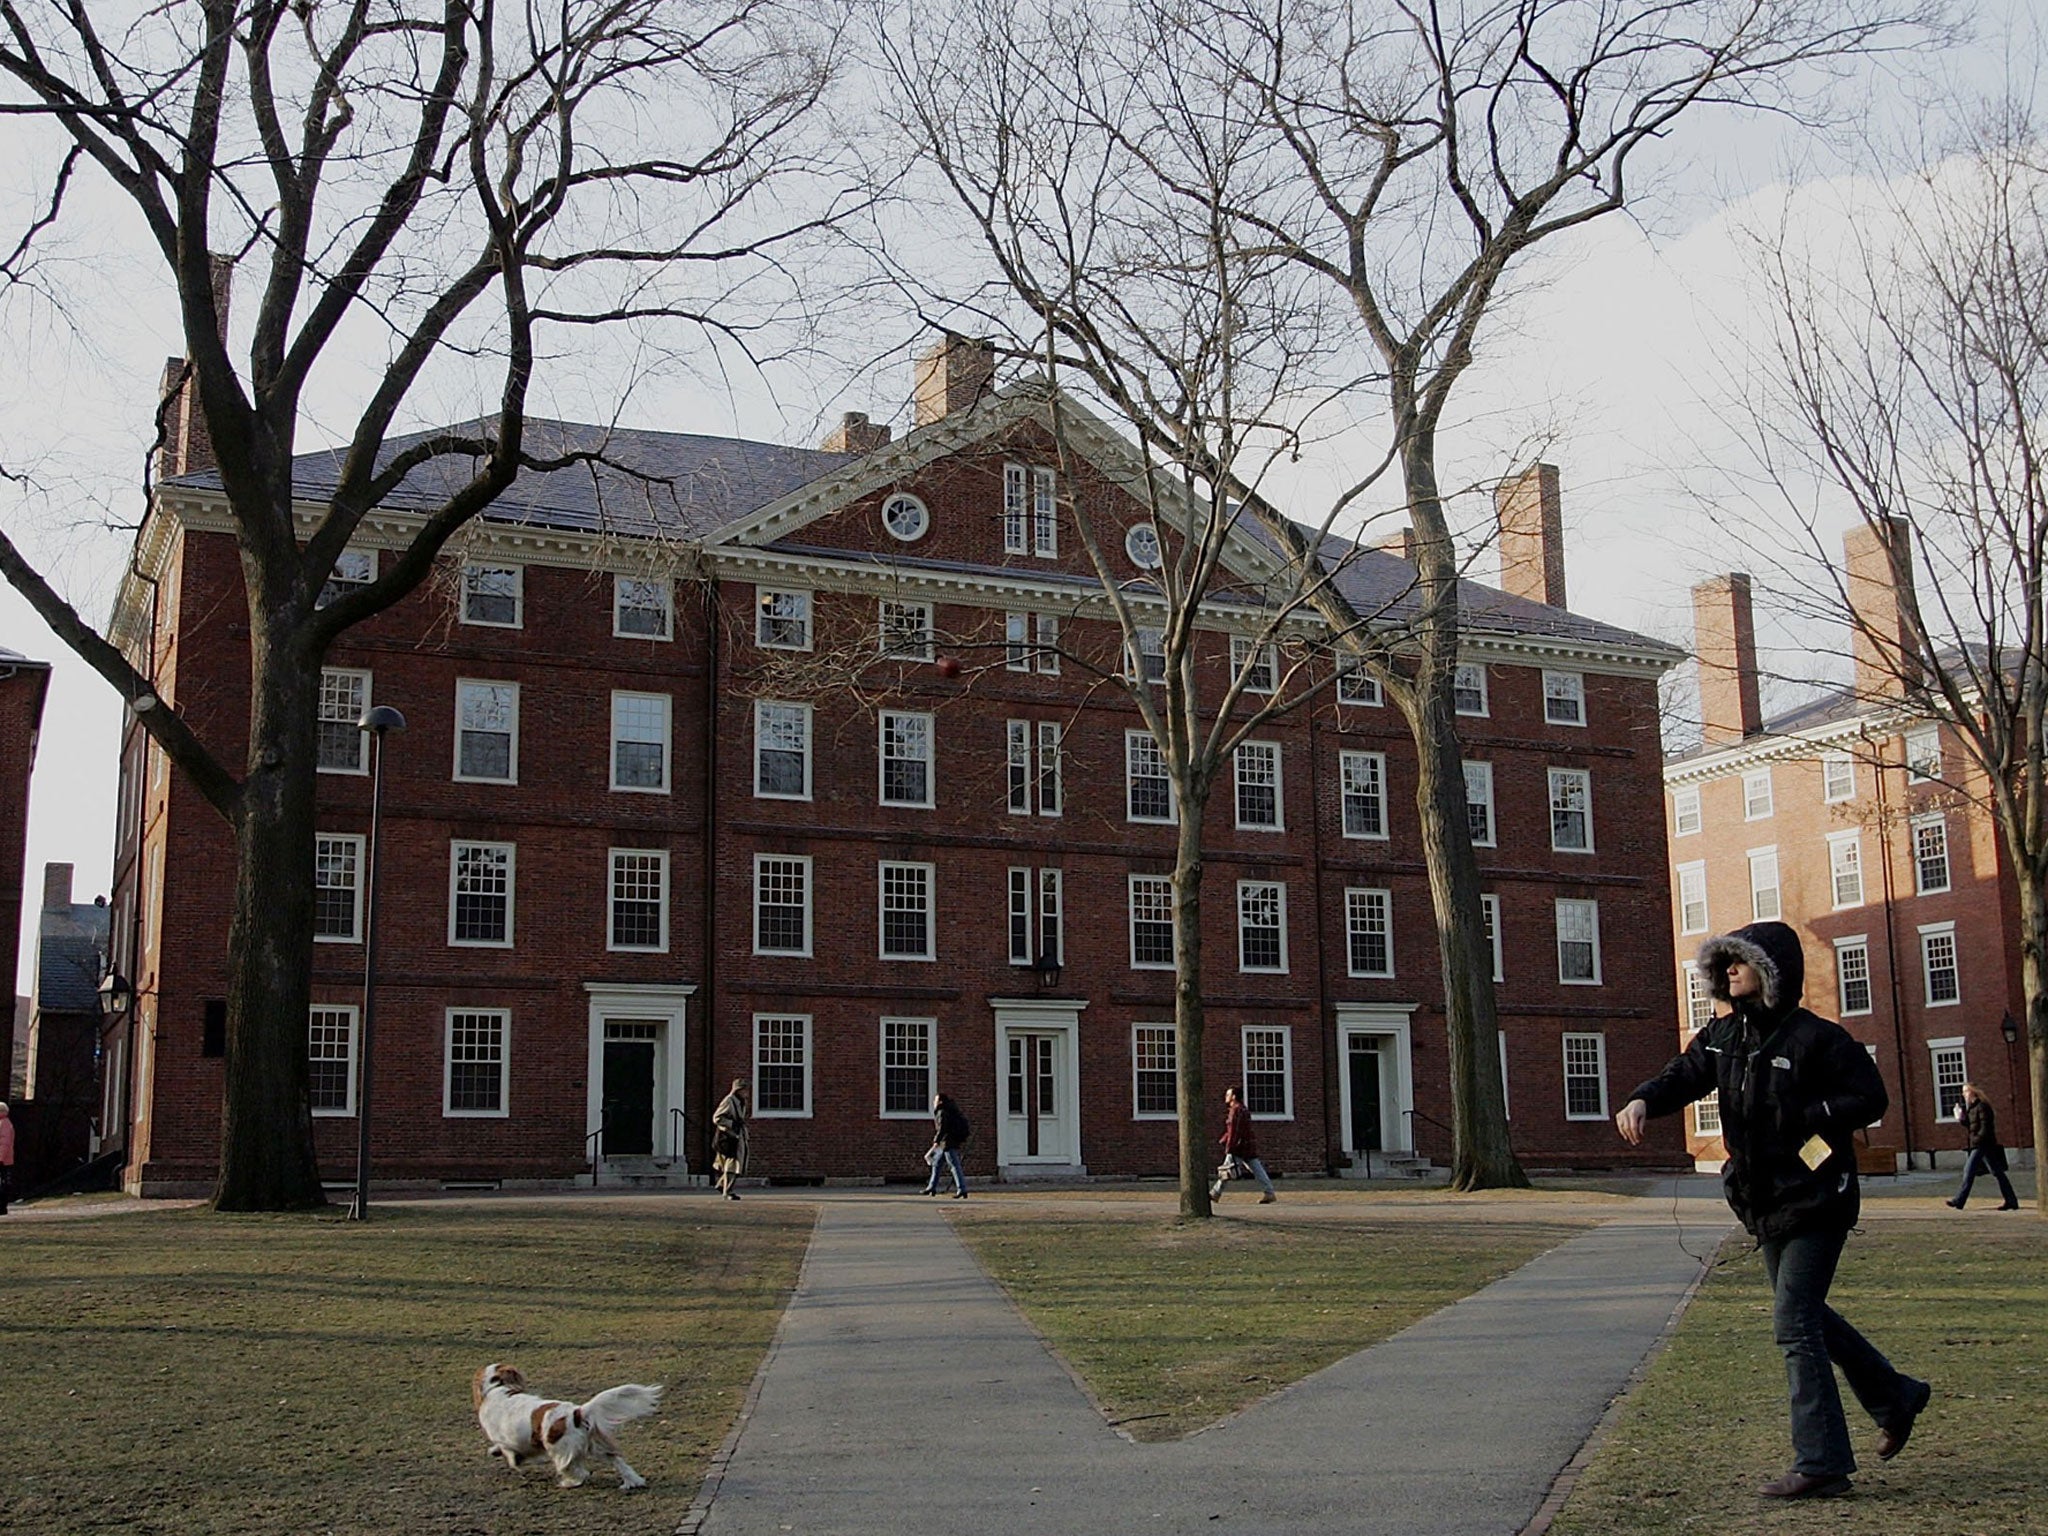 On campus at the world-renowned Harvard University